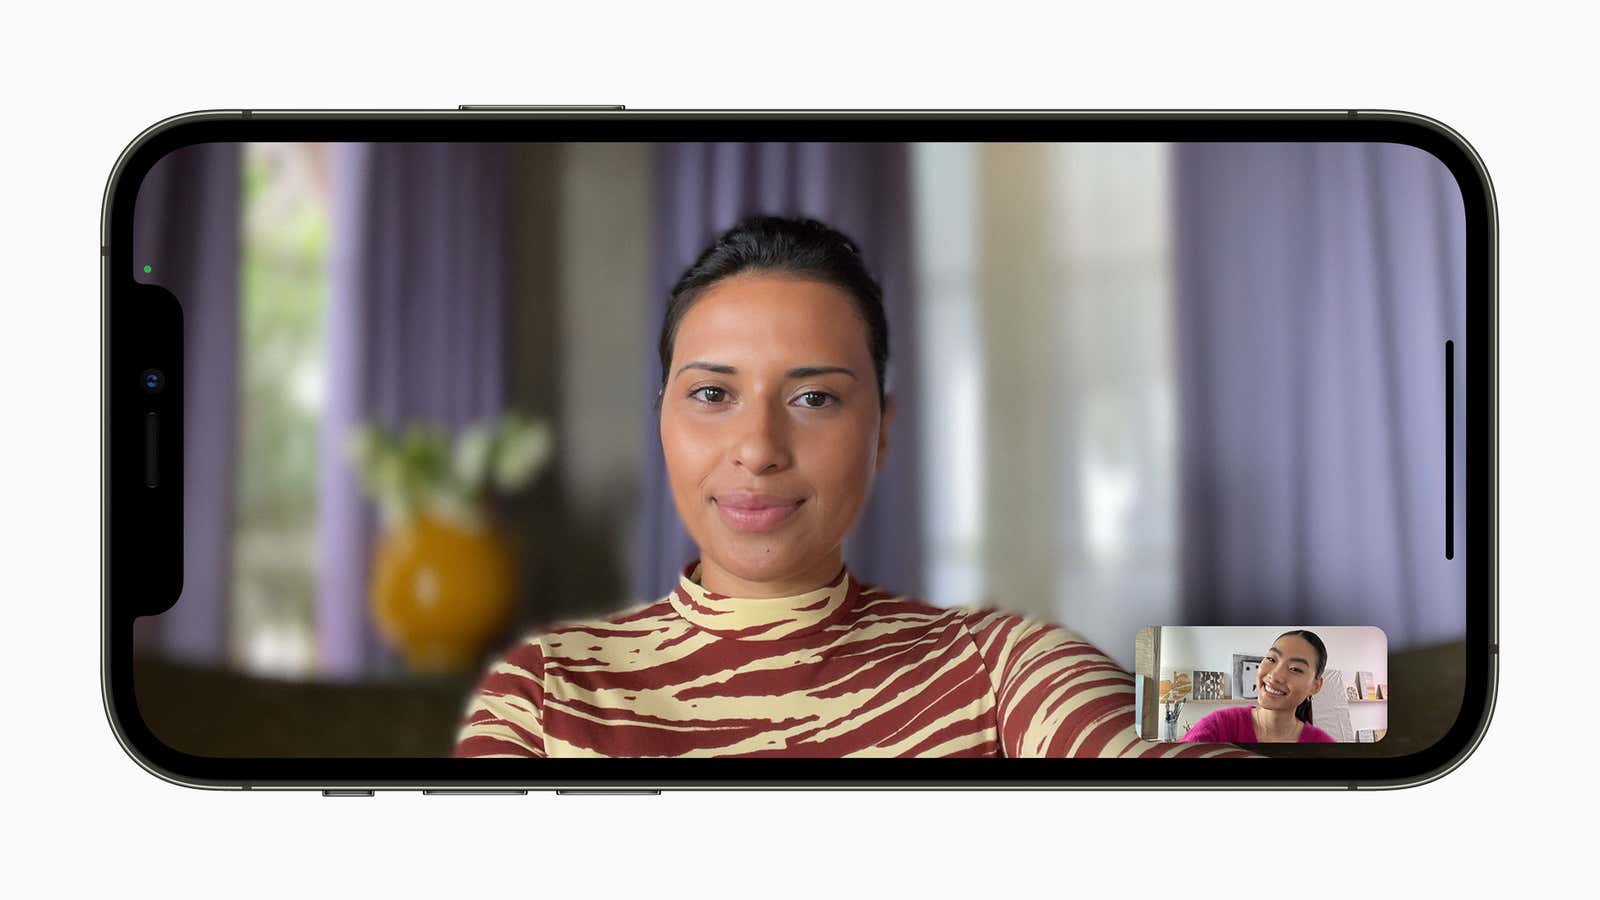 The new FaceTime update also includes portrait mode, which automatically blurs the background while keeping participants’ faces in sharp focus.